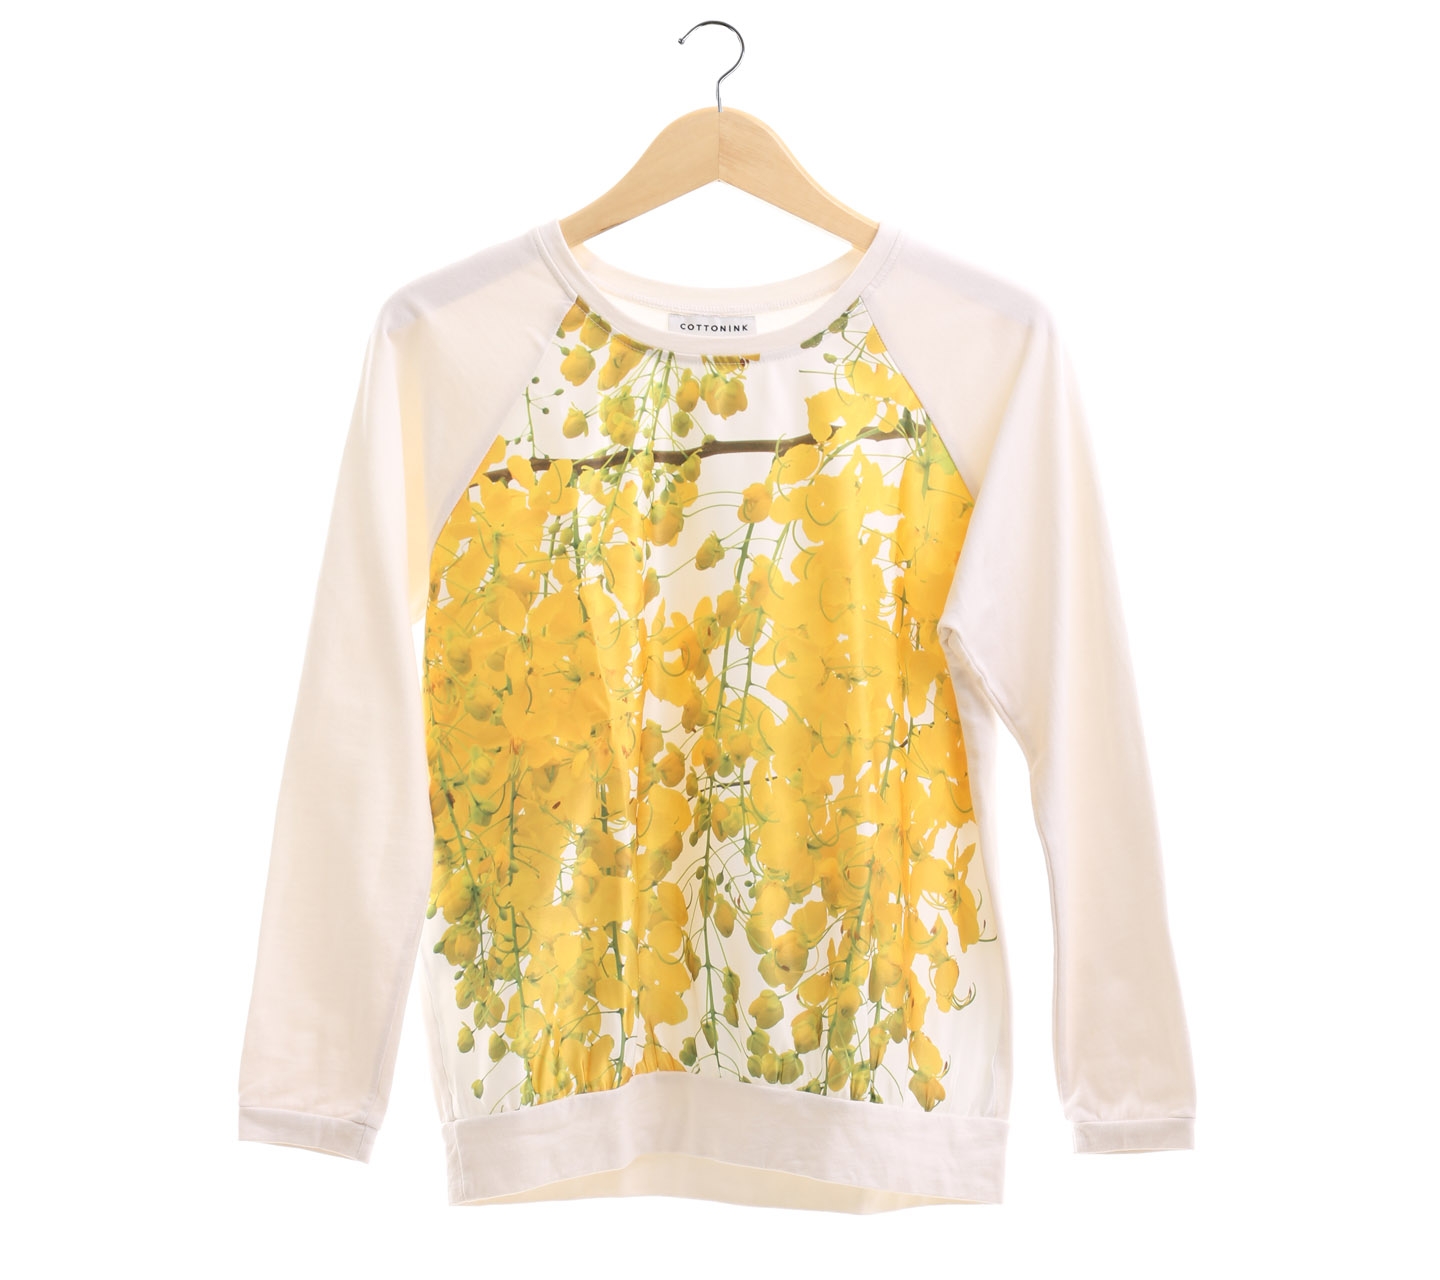 Cotton Ink White Floral Sweater